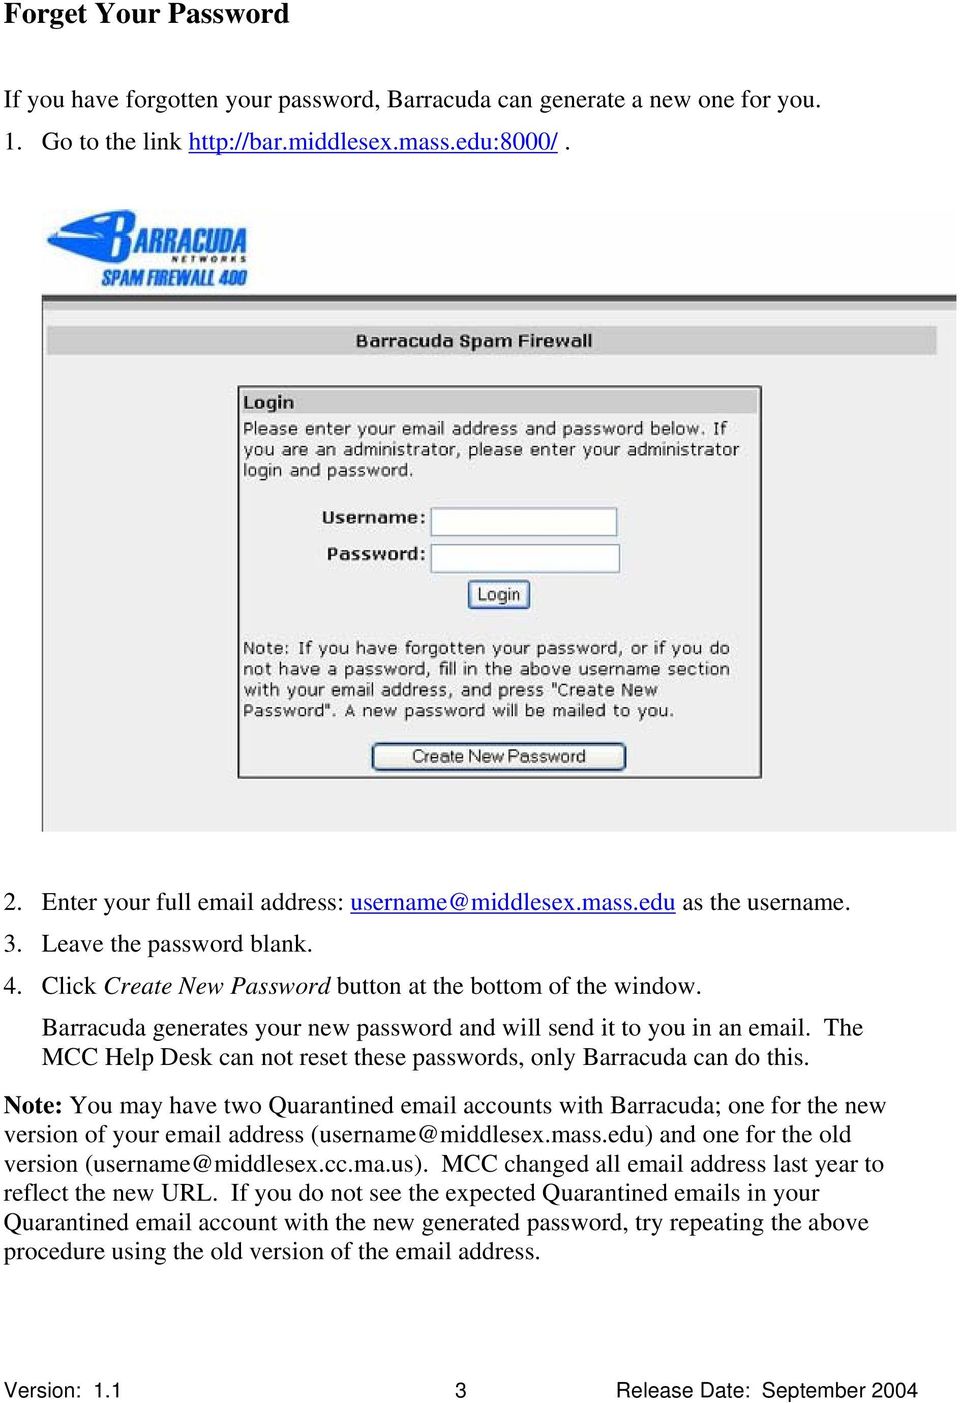 Barracuda generates your new password and will send it to you in an email. The MCC Help Desk can not reset these passwords, only Barracuda can do this.